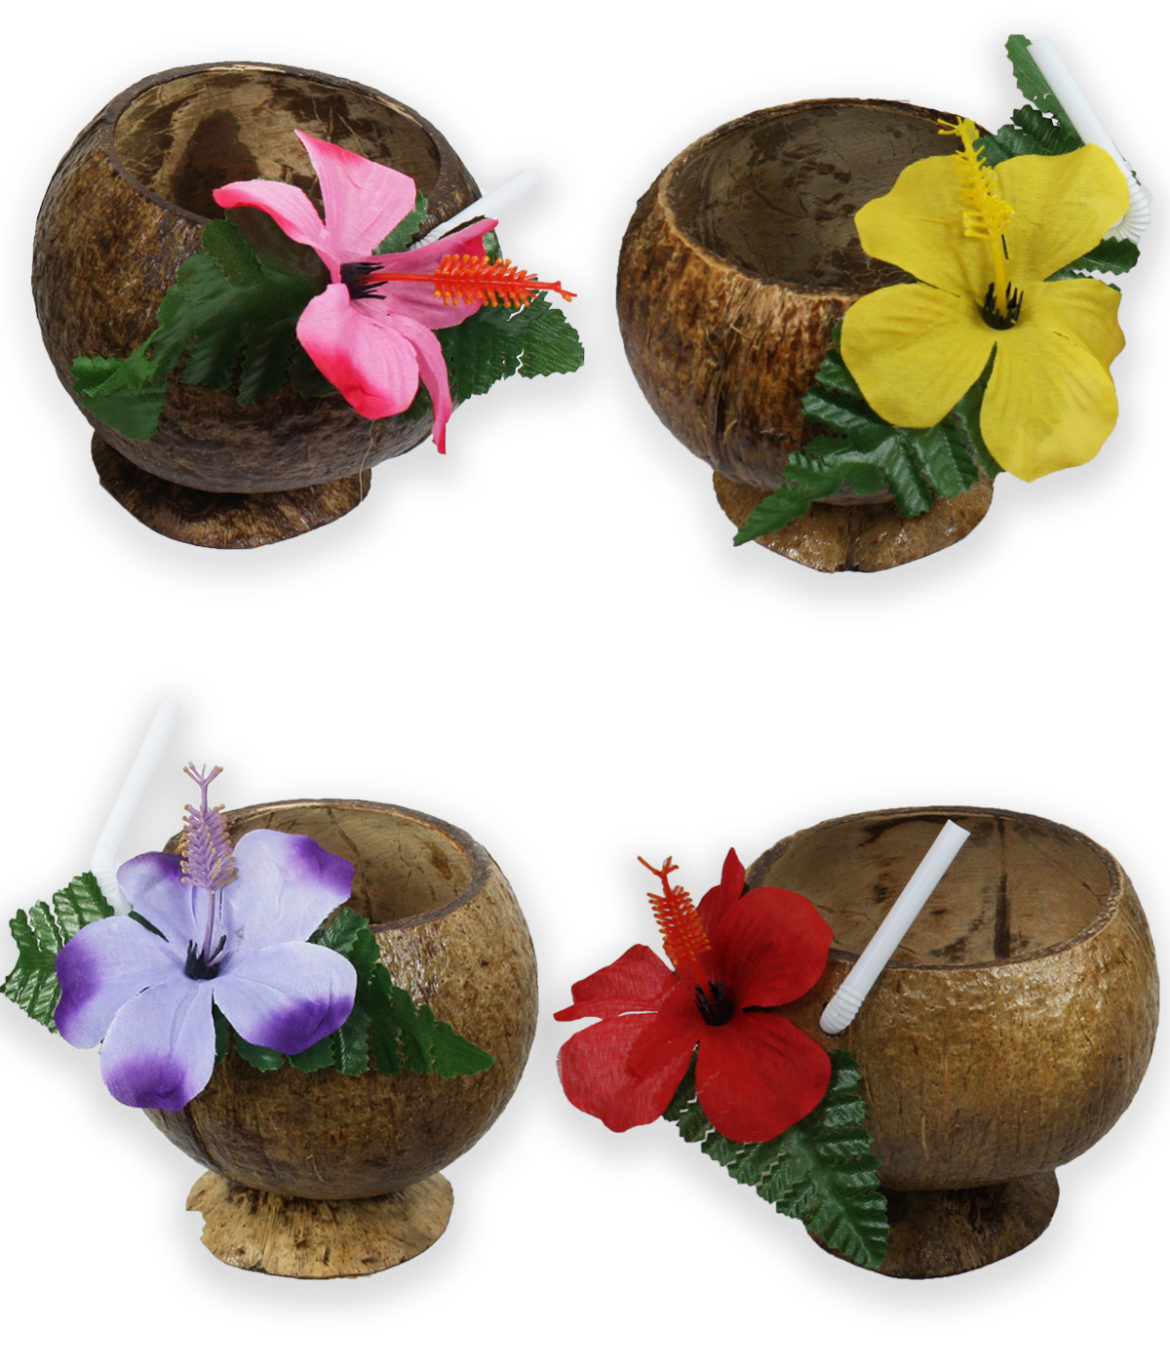 Coconut cup - Deluxe with base and straw - Bulk Discount - Quality